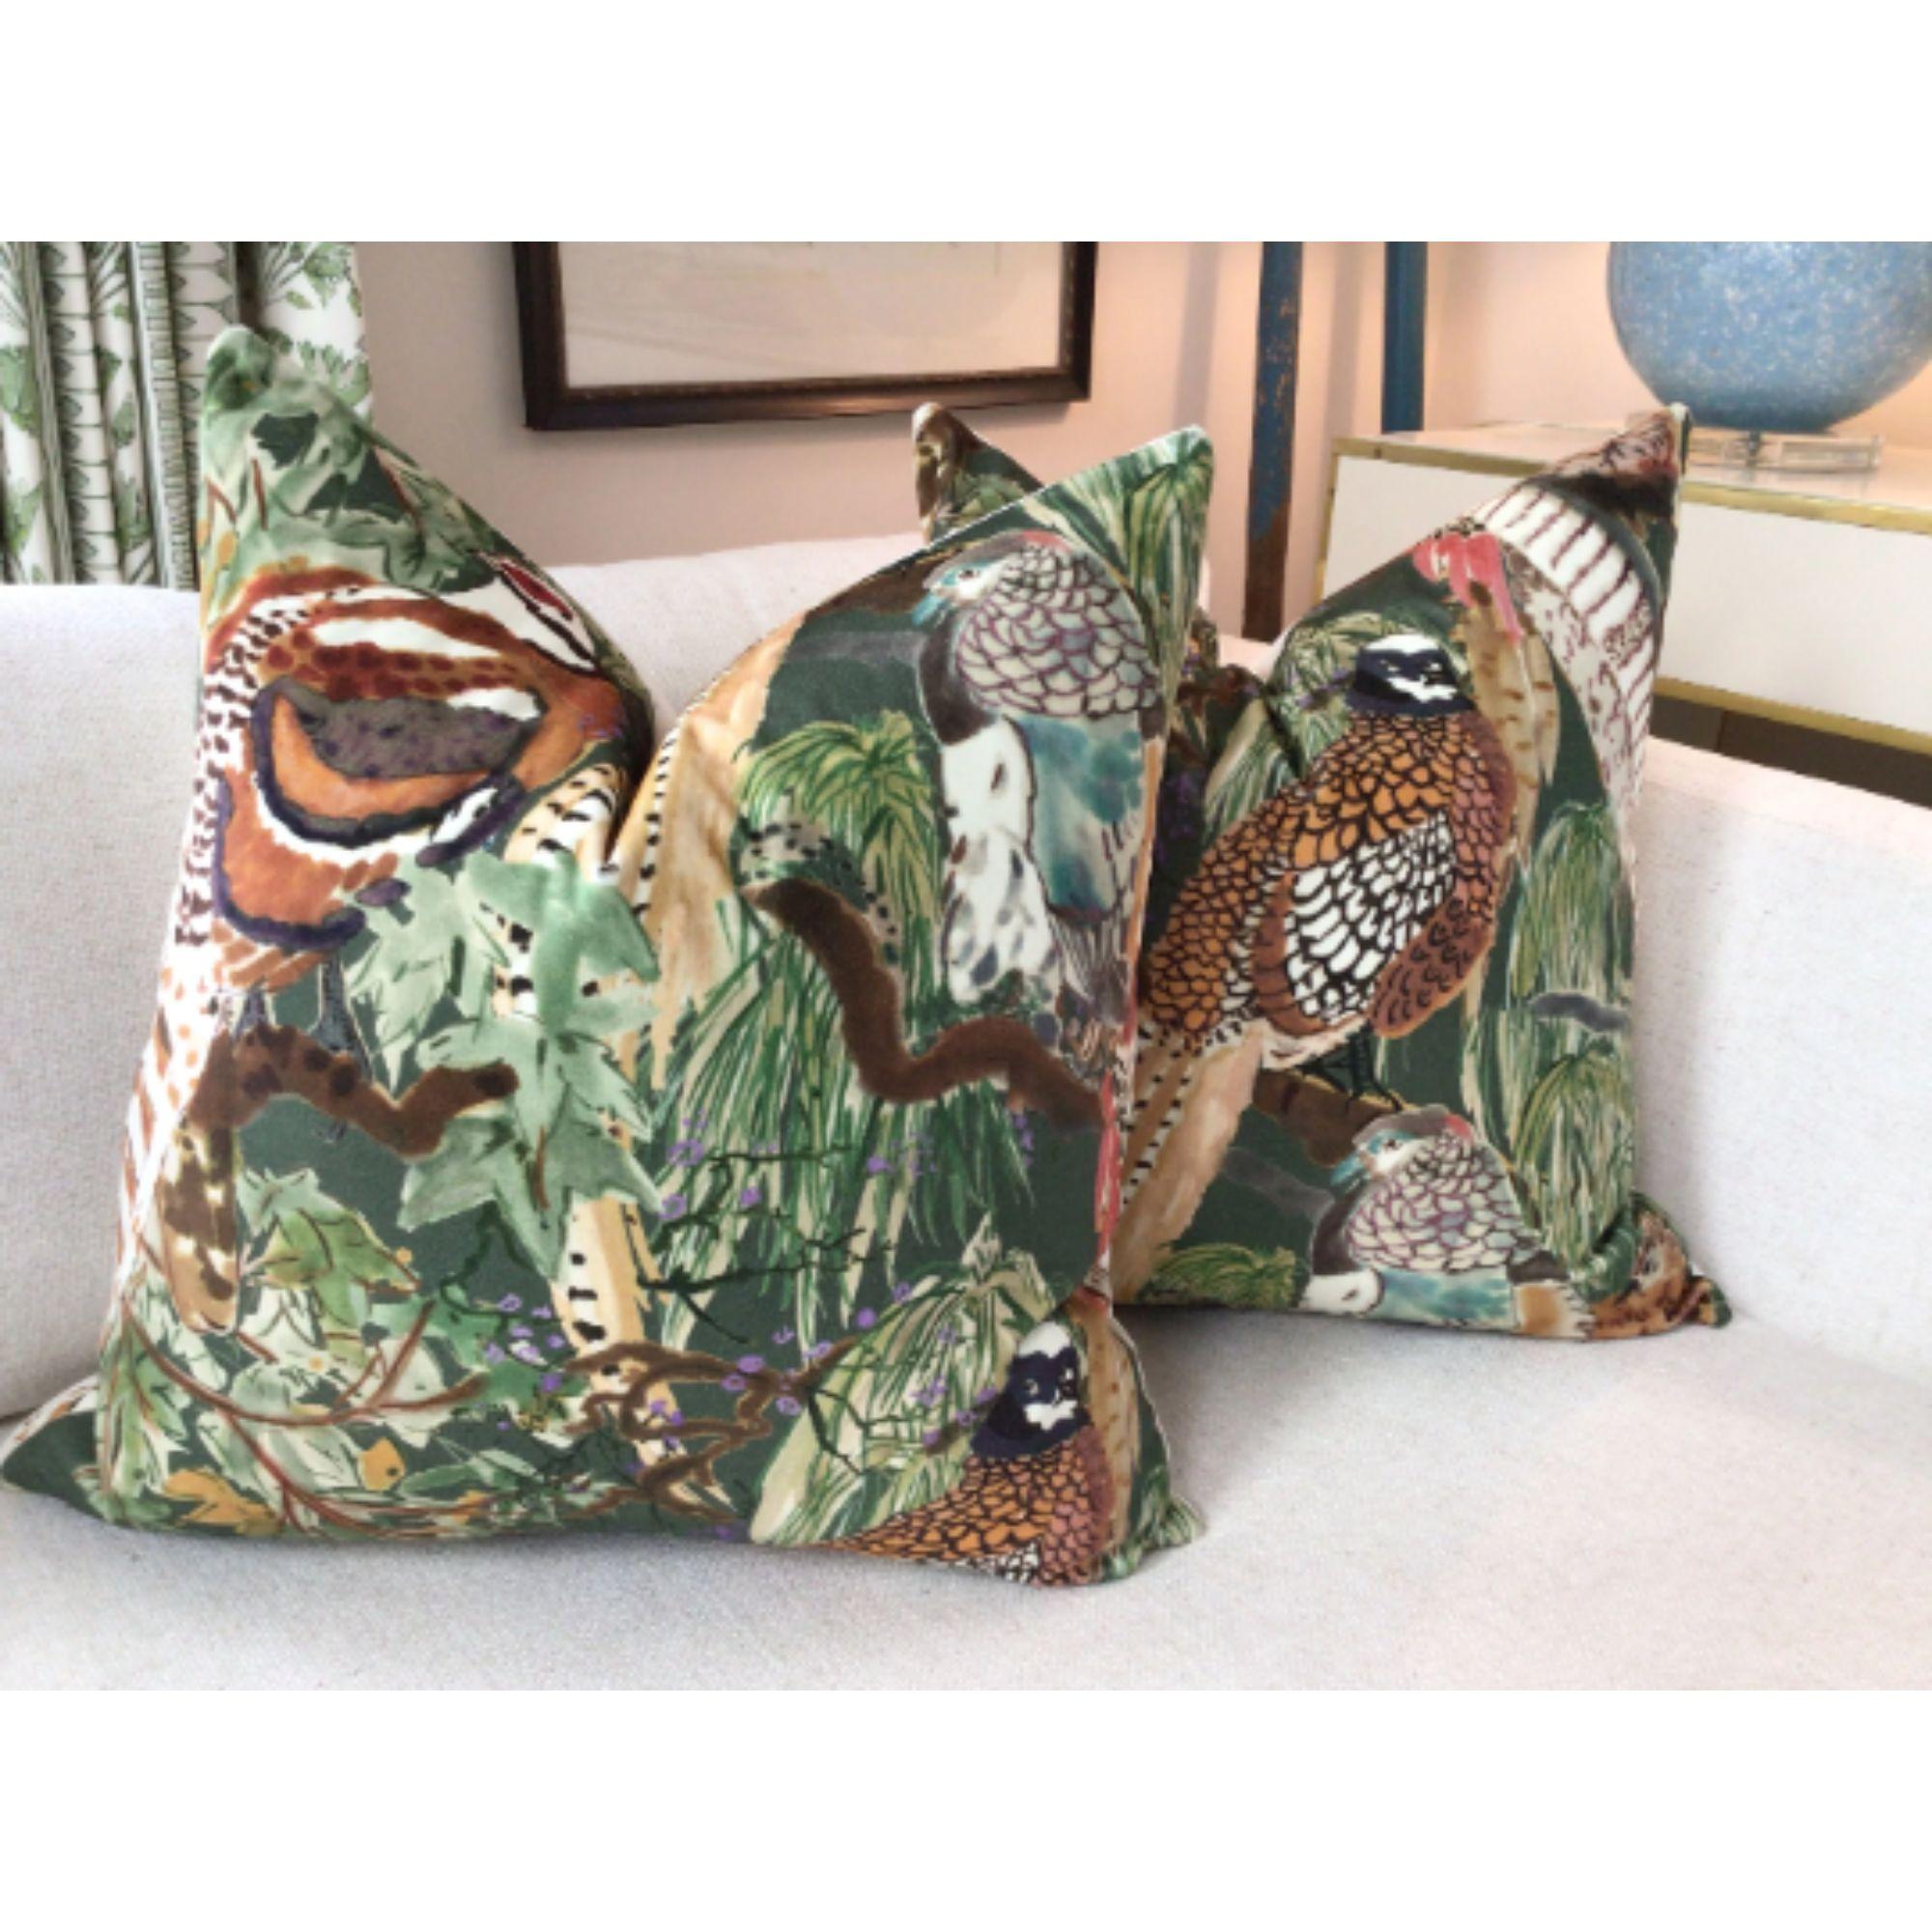 Lovely velvet rich and luxurious fabric from Lee Jofa. Game Birds features….well…..game birds. (I think they’re quail?) in wonderfully saturated shades of cinnamon brown and black with foliage in deep green and straw tan. How perfect would these be